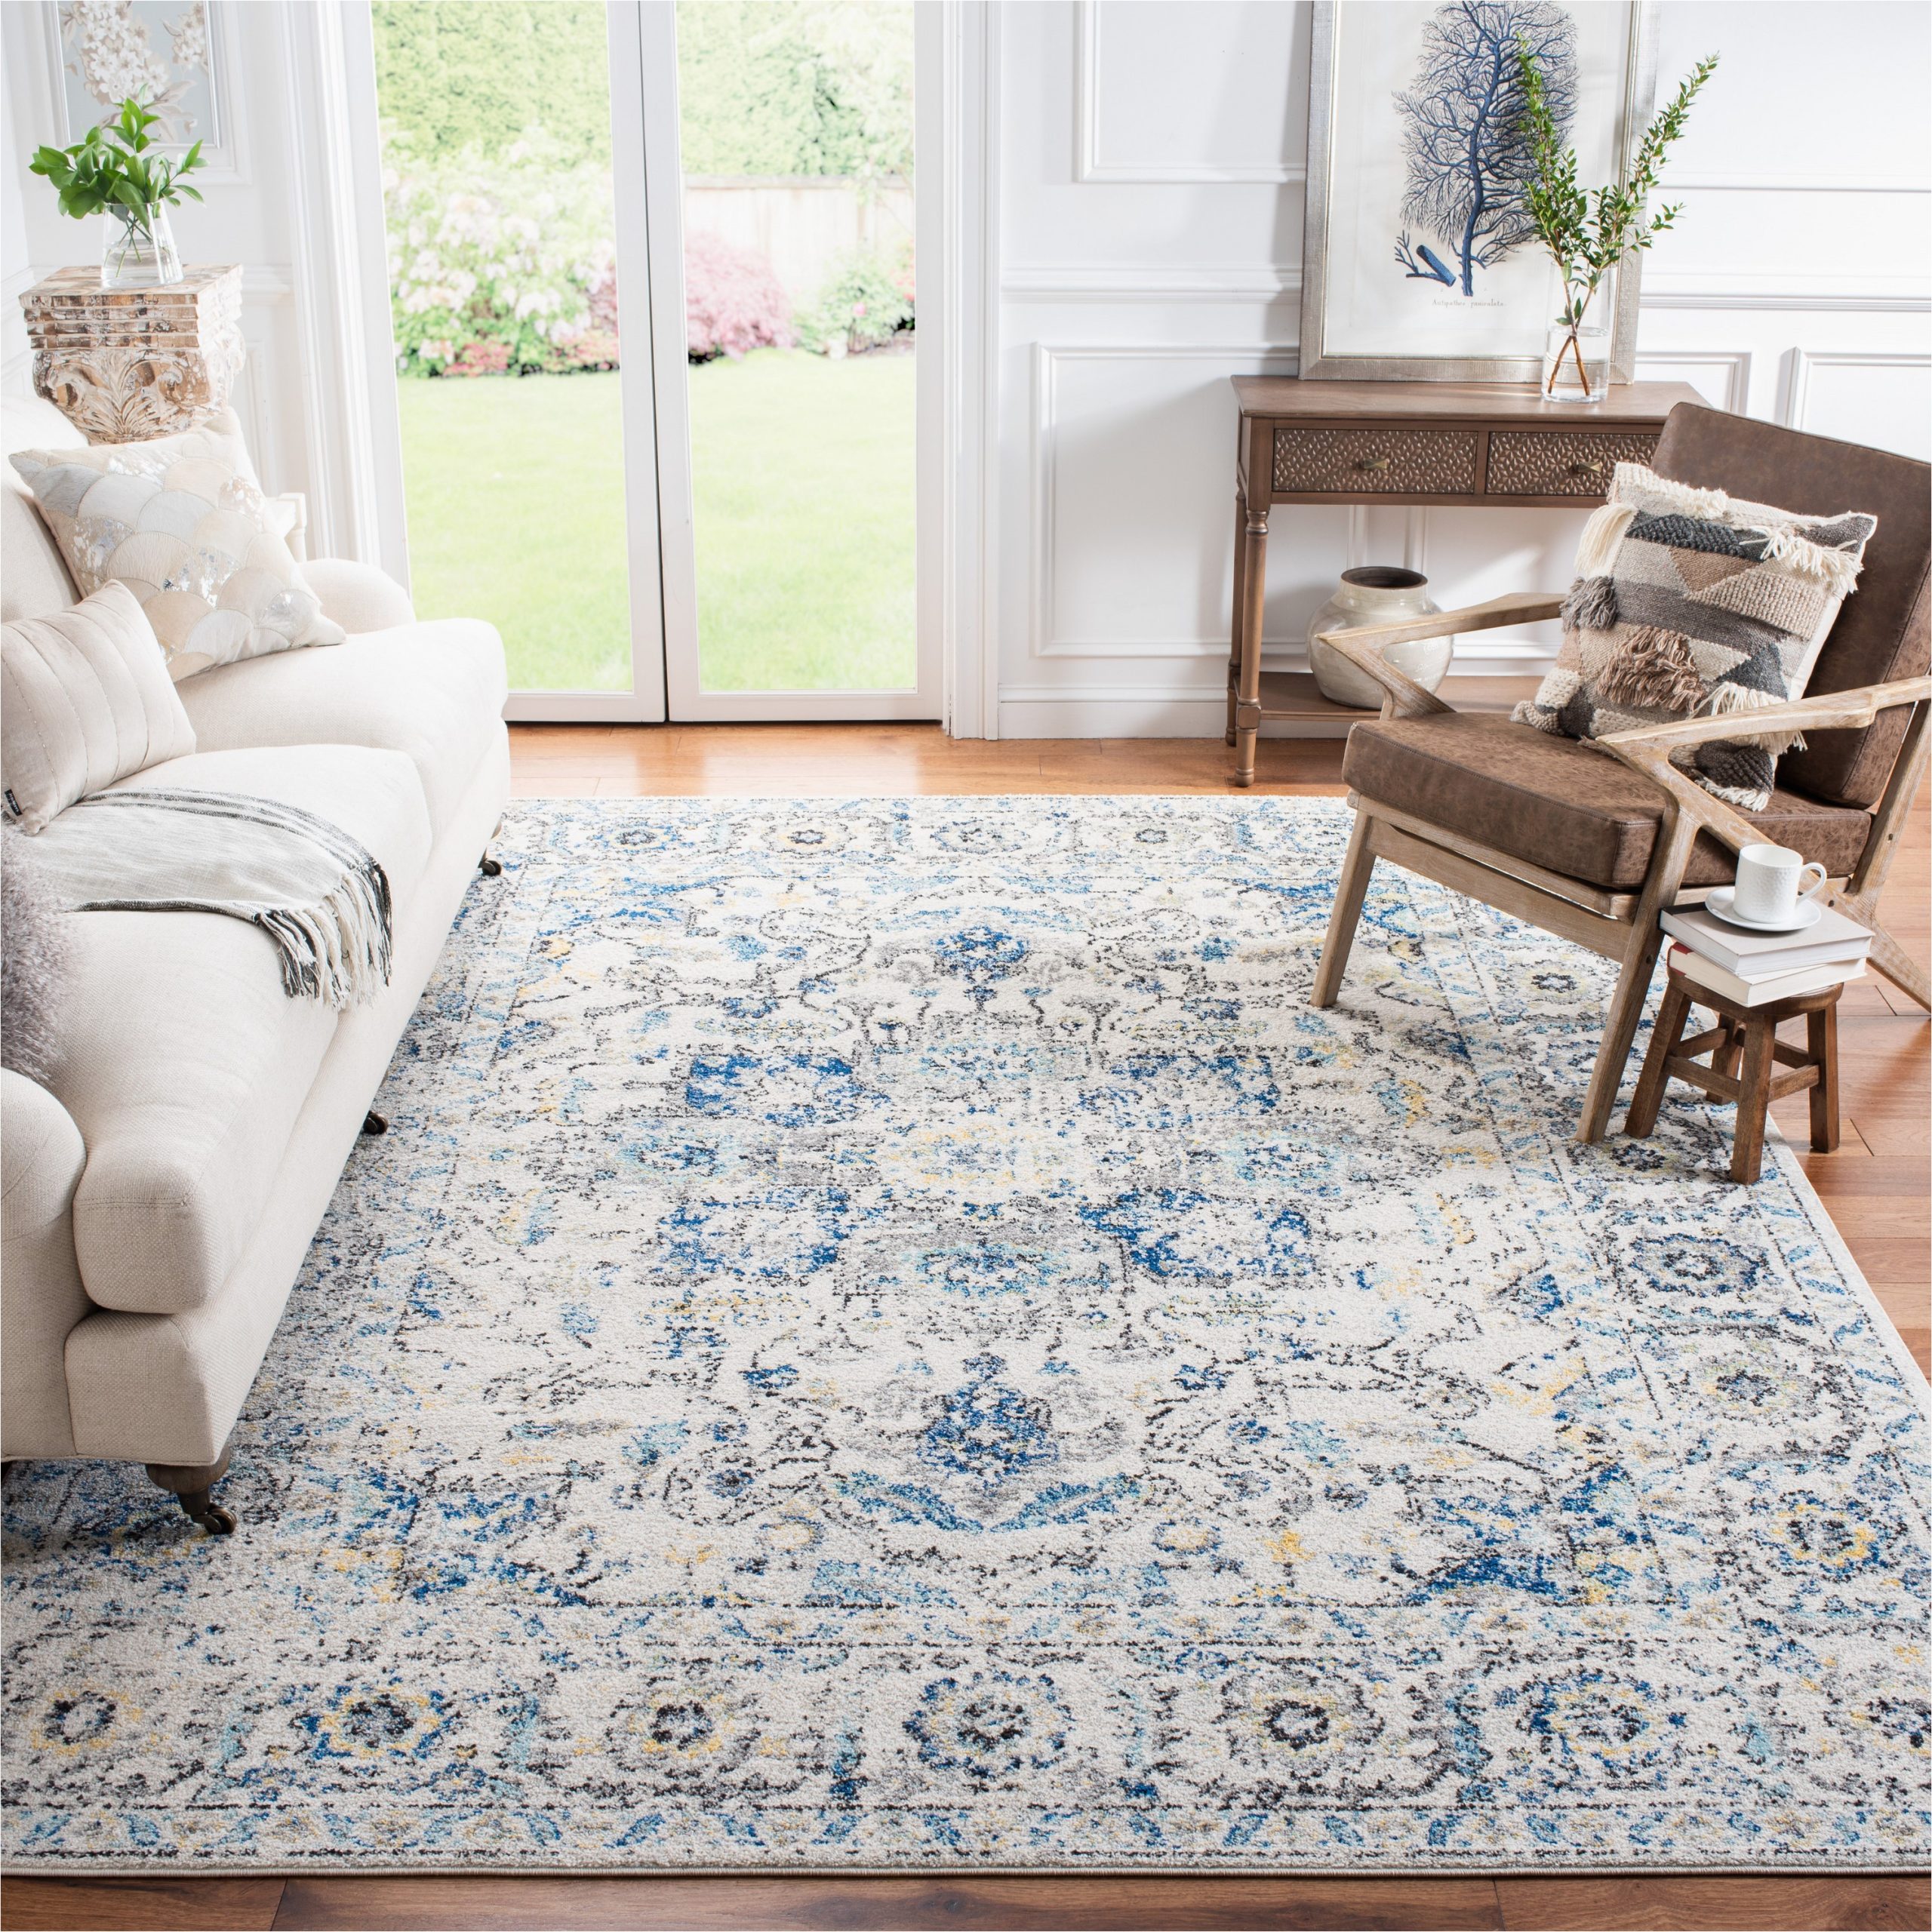 Lowes area Rugs 12 X 14 Safavieh Madison nord 10 X 14 Gray/blue Indoor Distressed/overdyed …